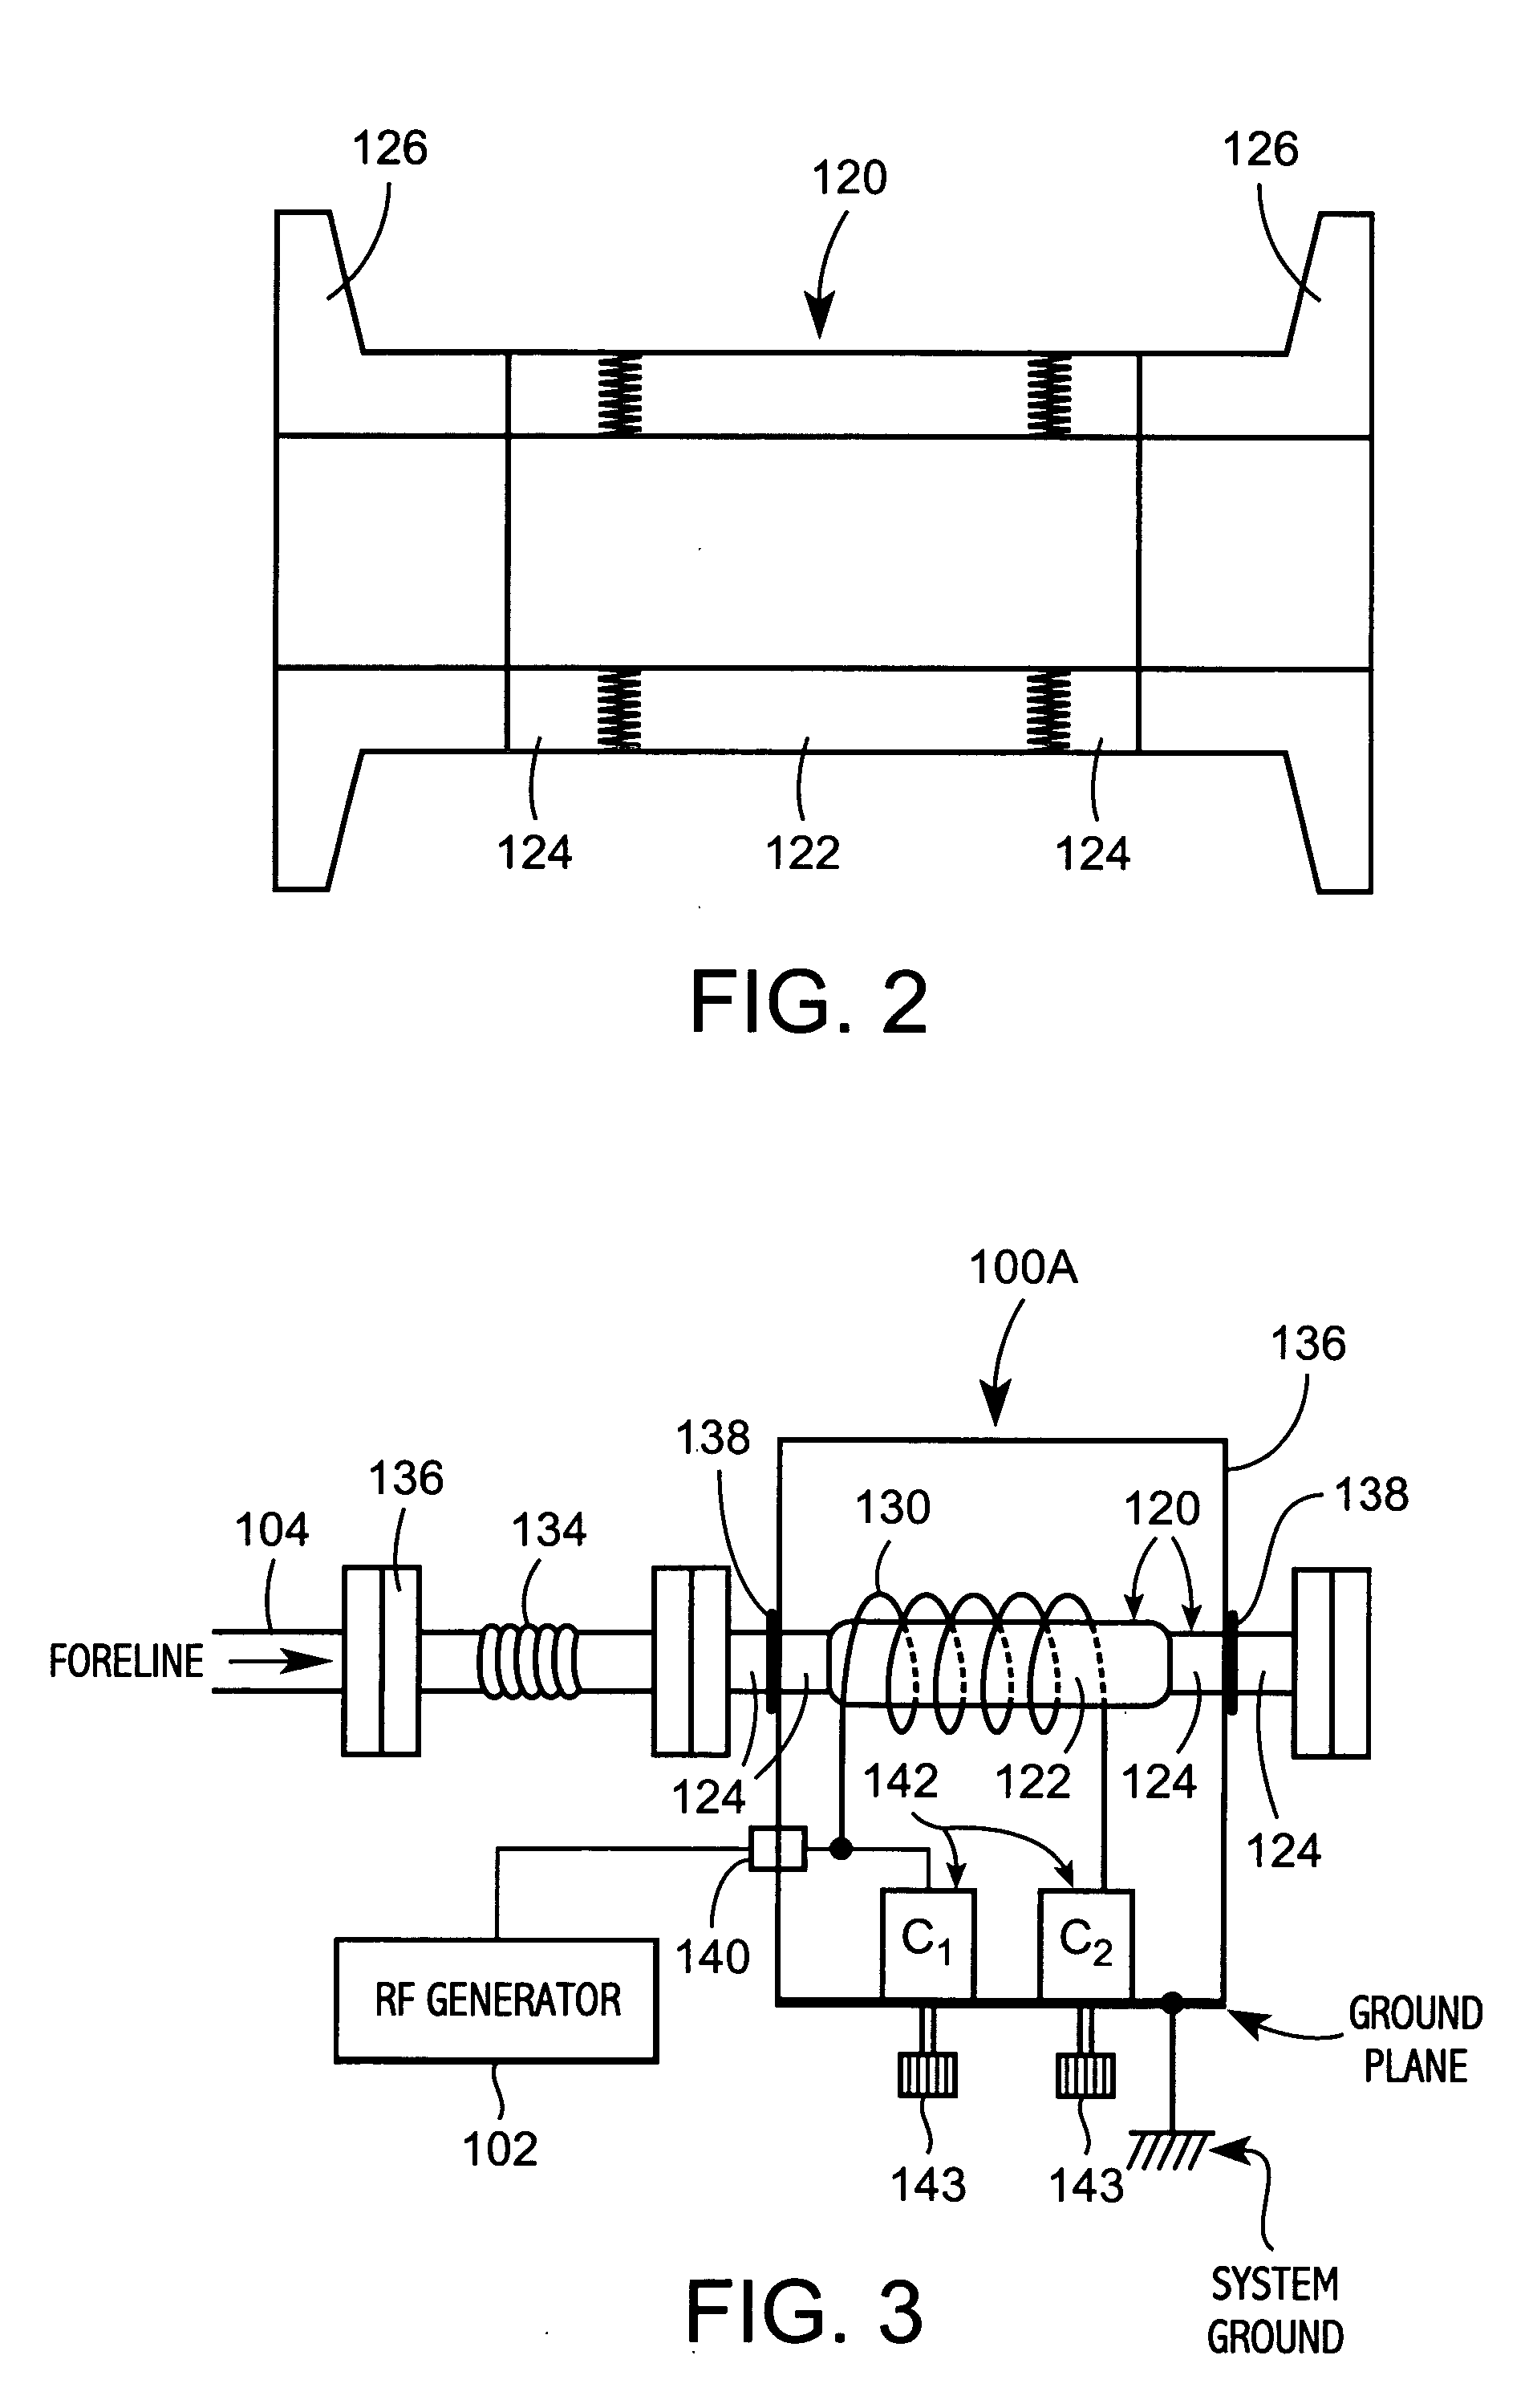 Method and apparatus for abatement of reaction products from a vacuum processing chamber